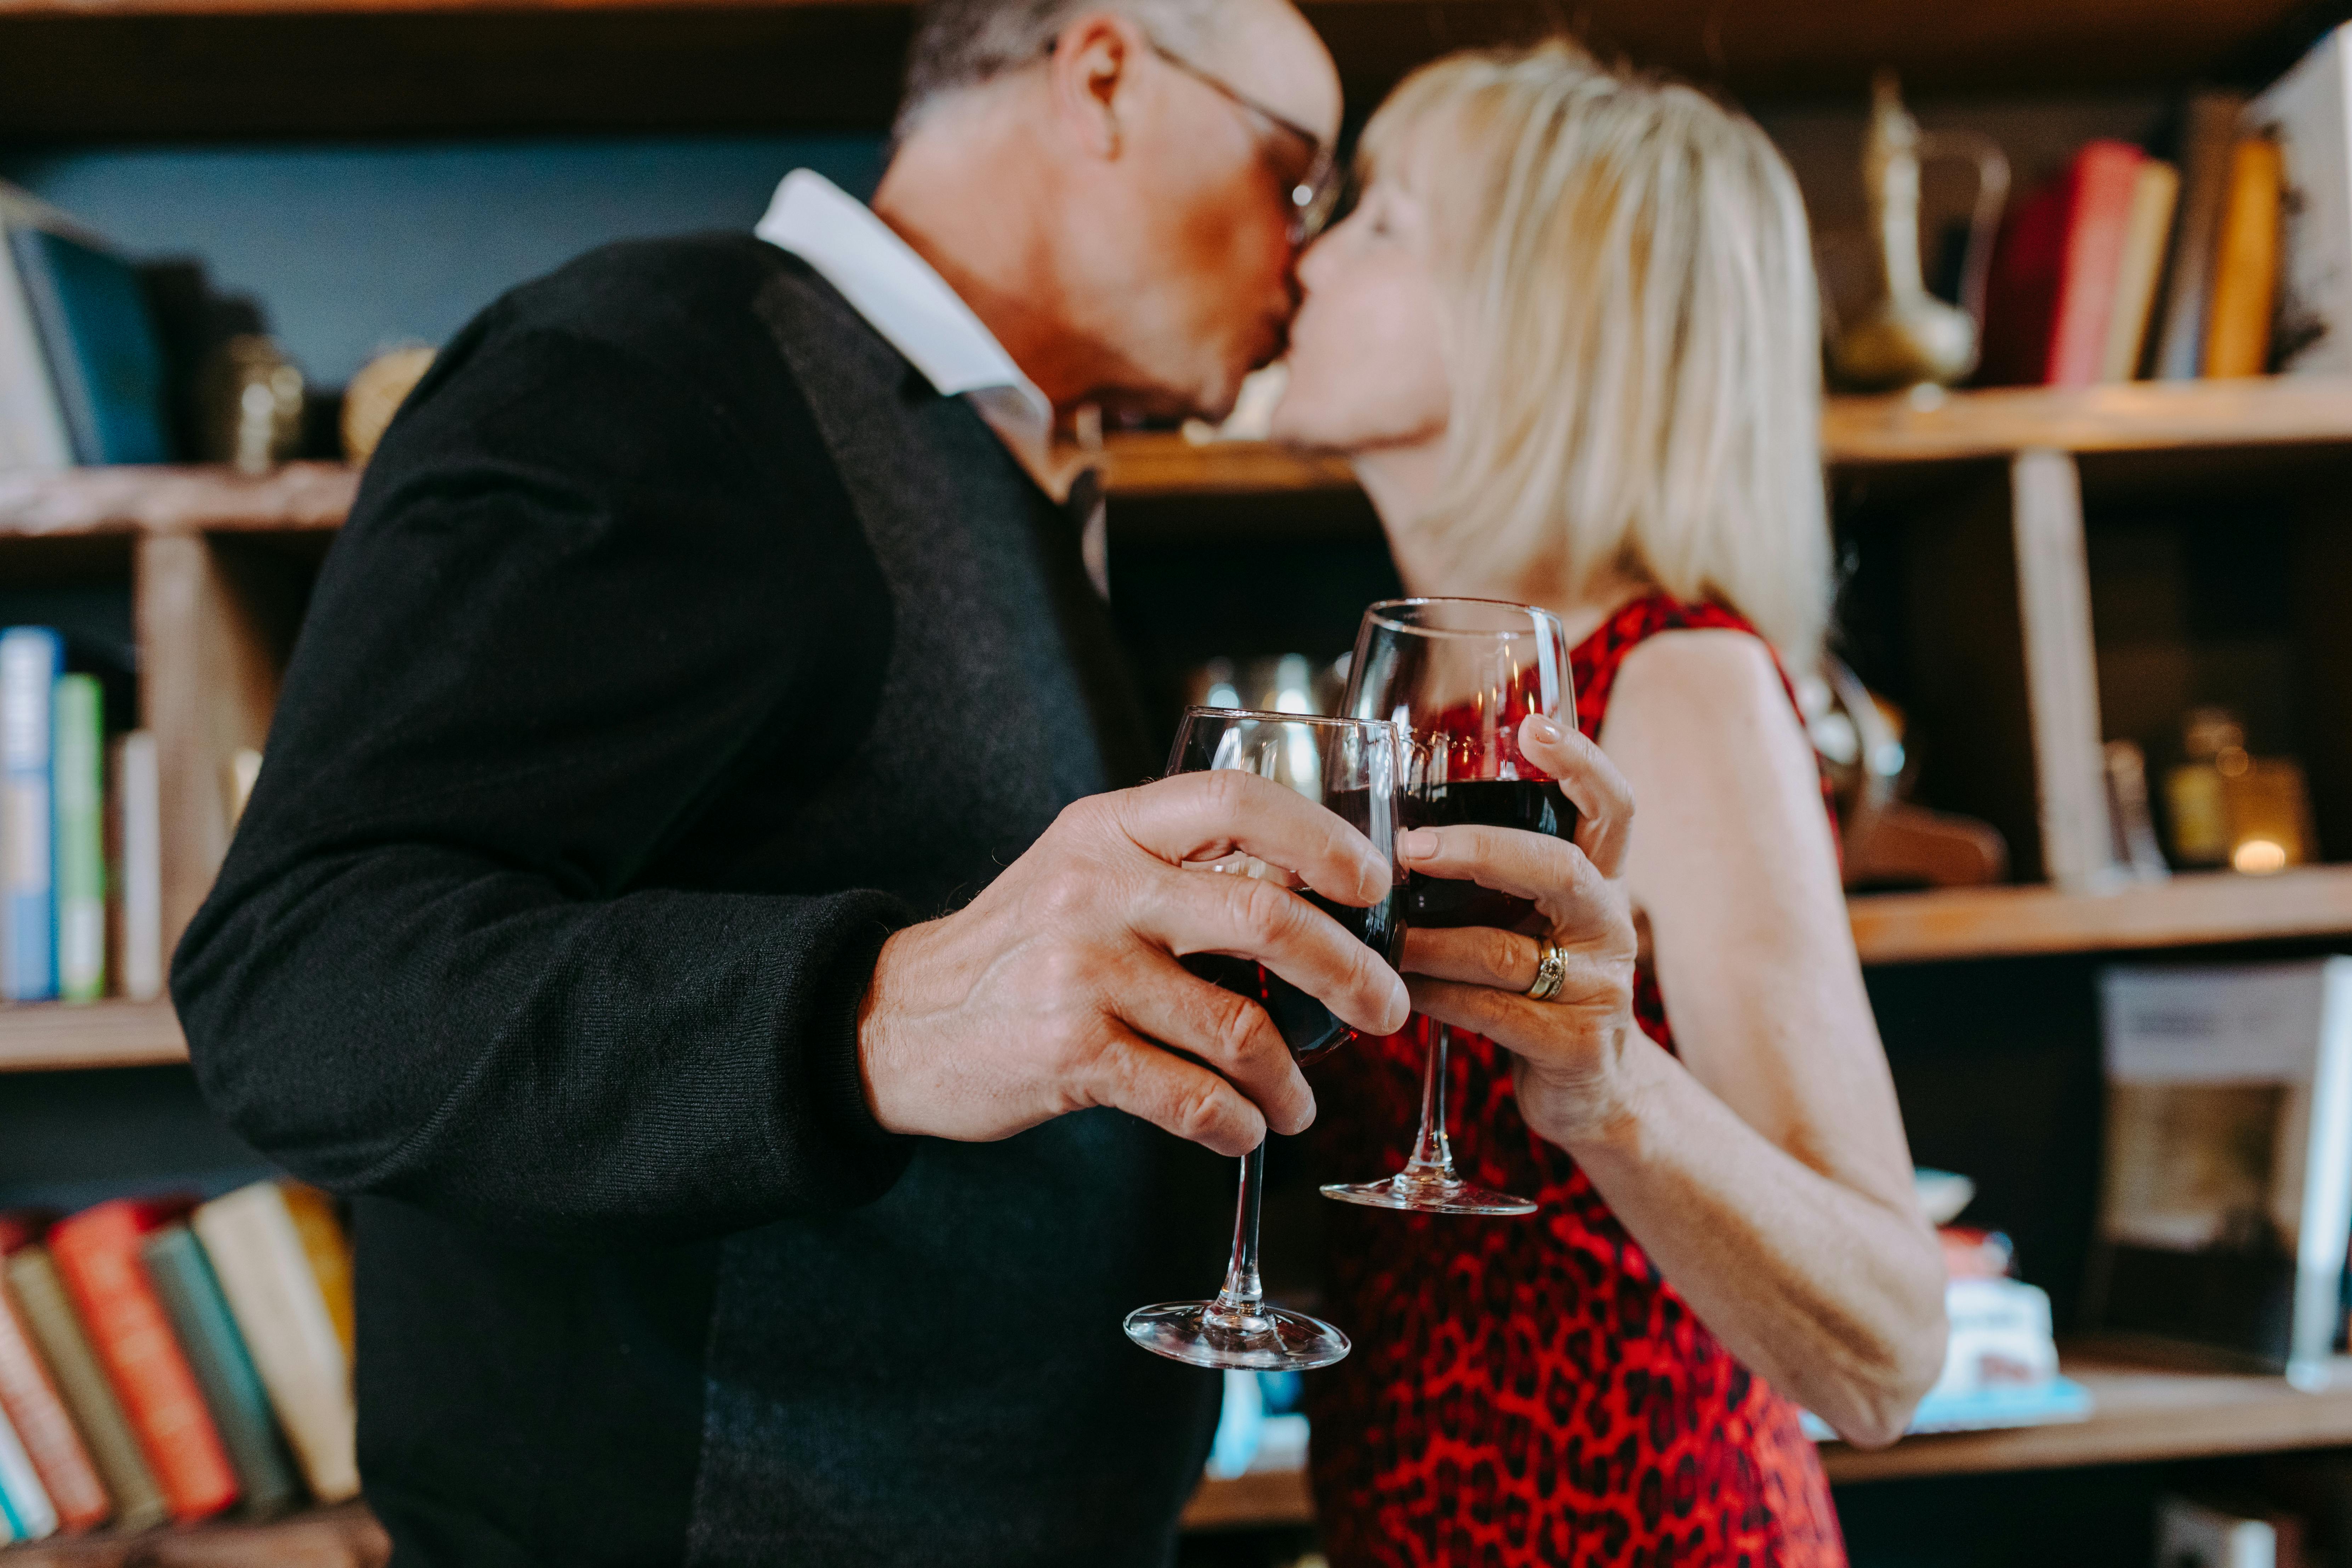 A couple sharing a toast and a kiss | Source: Pexels